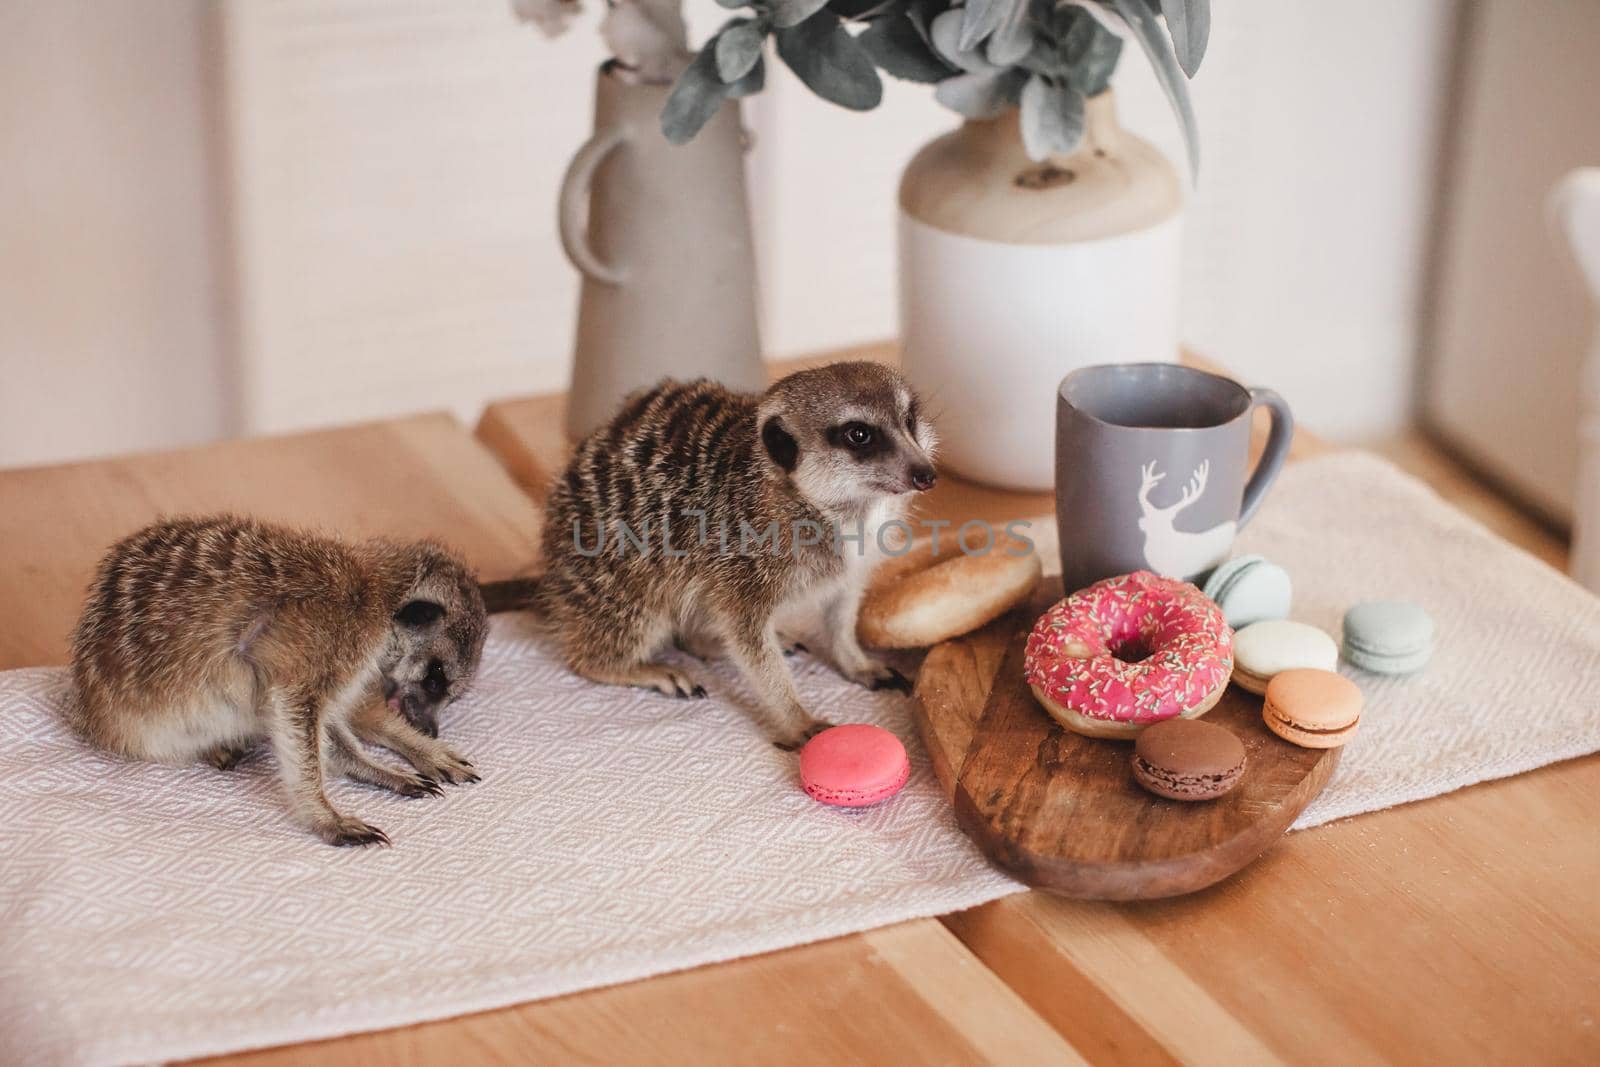 The meerkats or suricates eating sweets and donuts by RosaJay